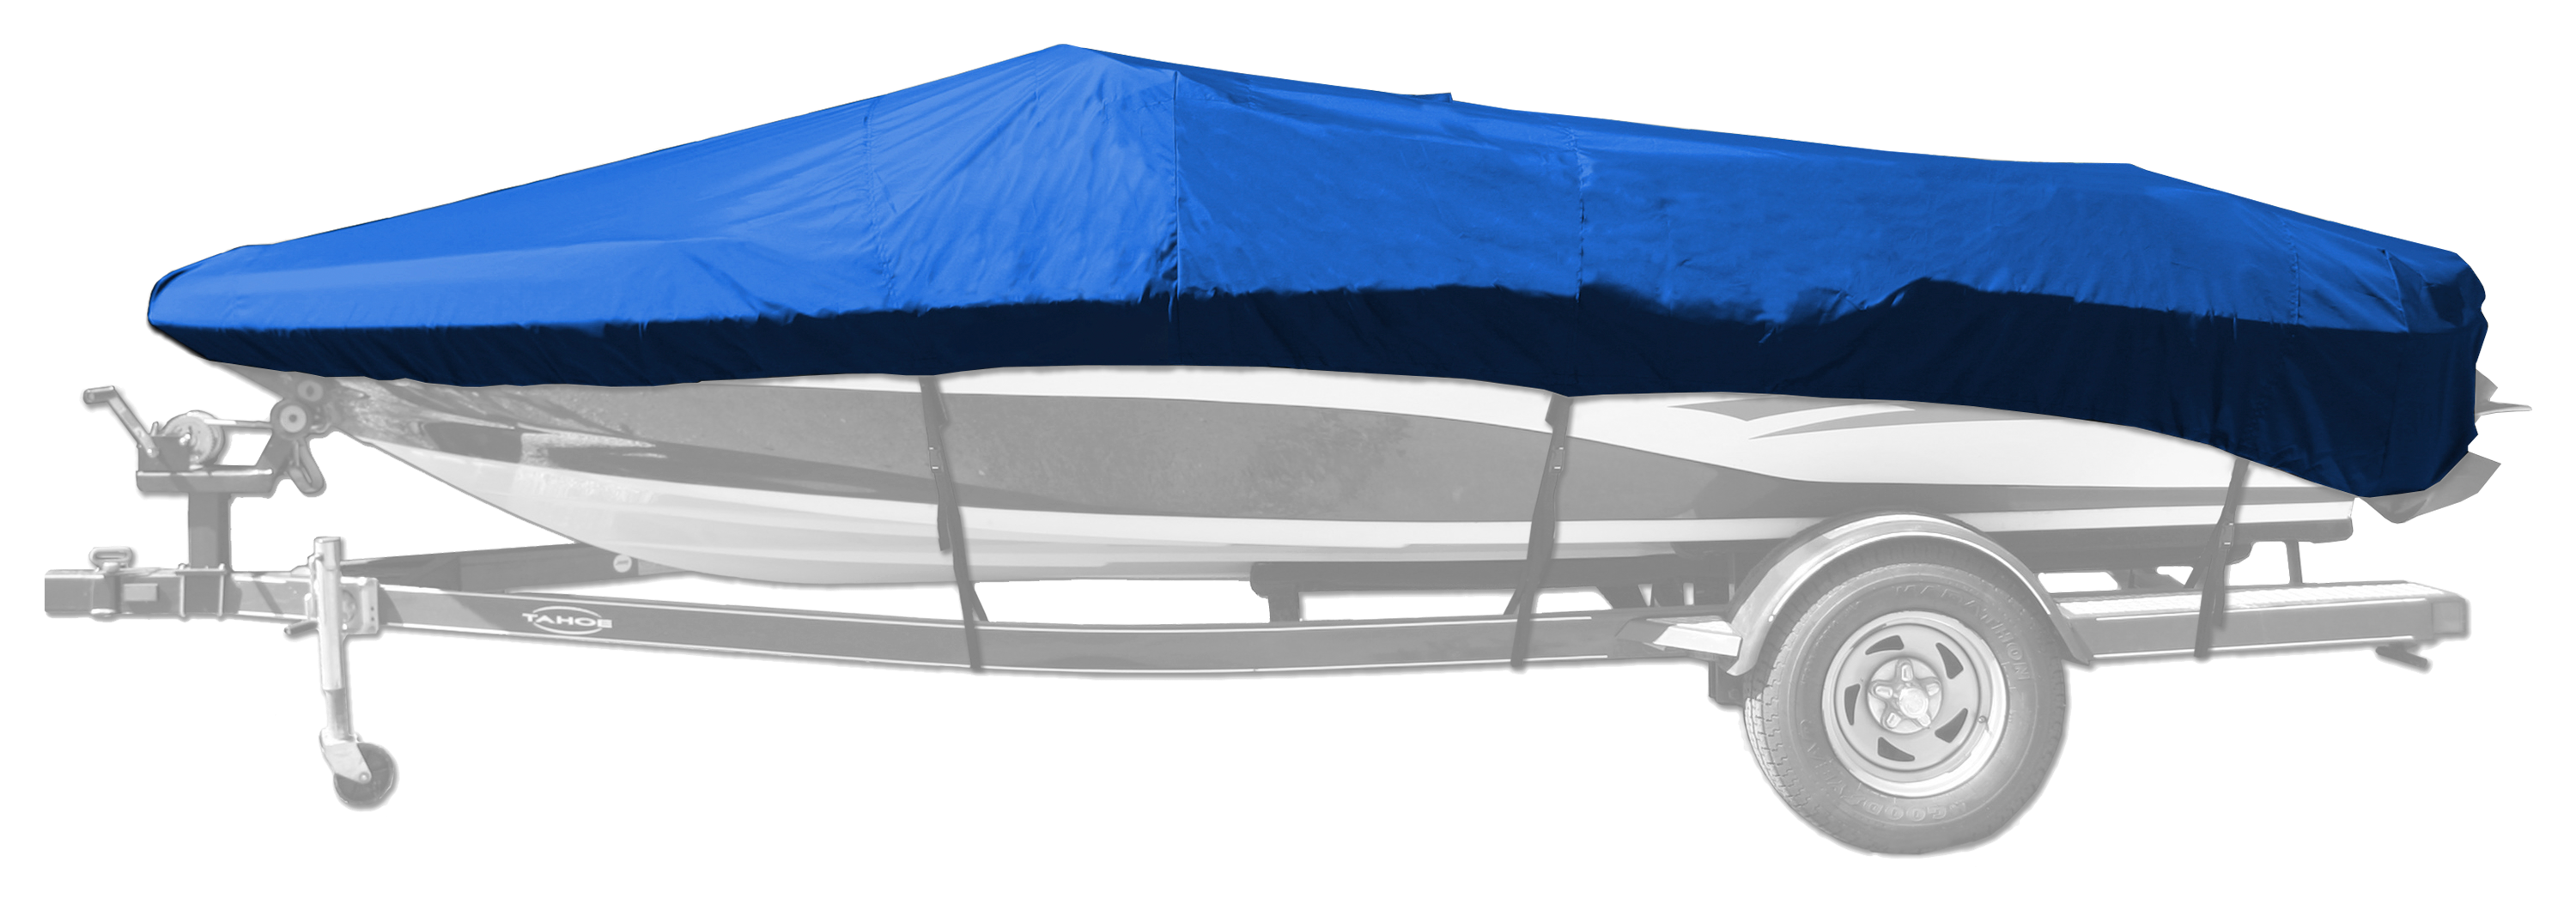 Bass Pro Shops Select Fit Hurricane Boat Cover by Westland for Euro V-Hull Runabout I/O Model - Blue - 17'6'' to 18'5